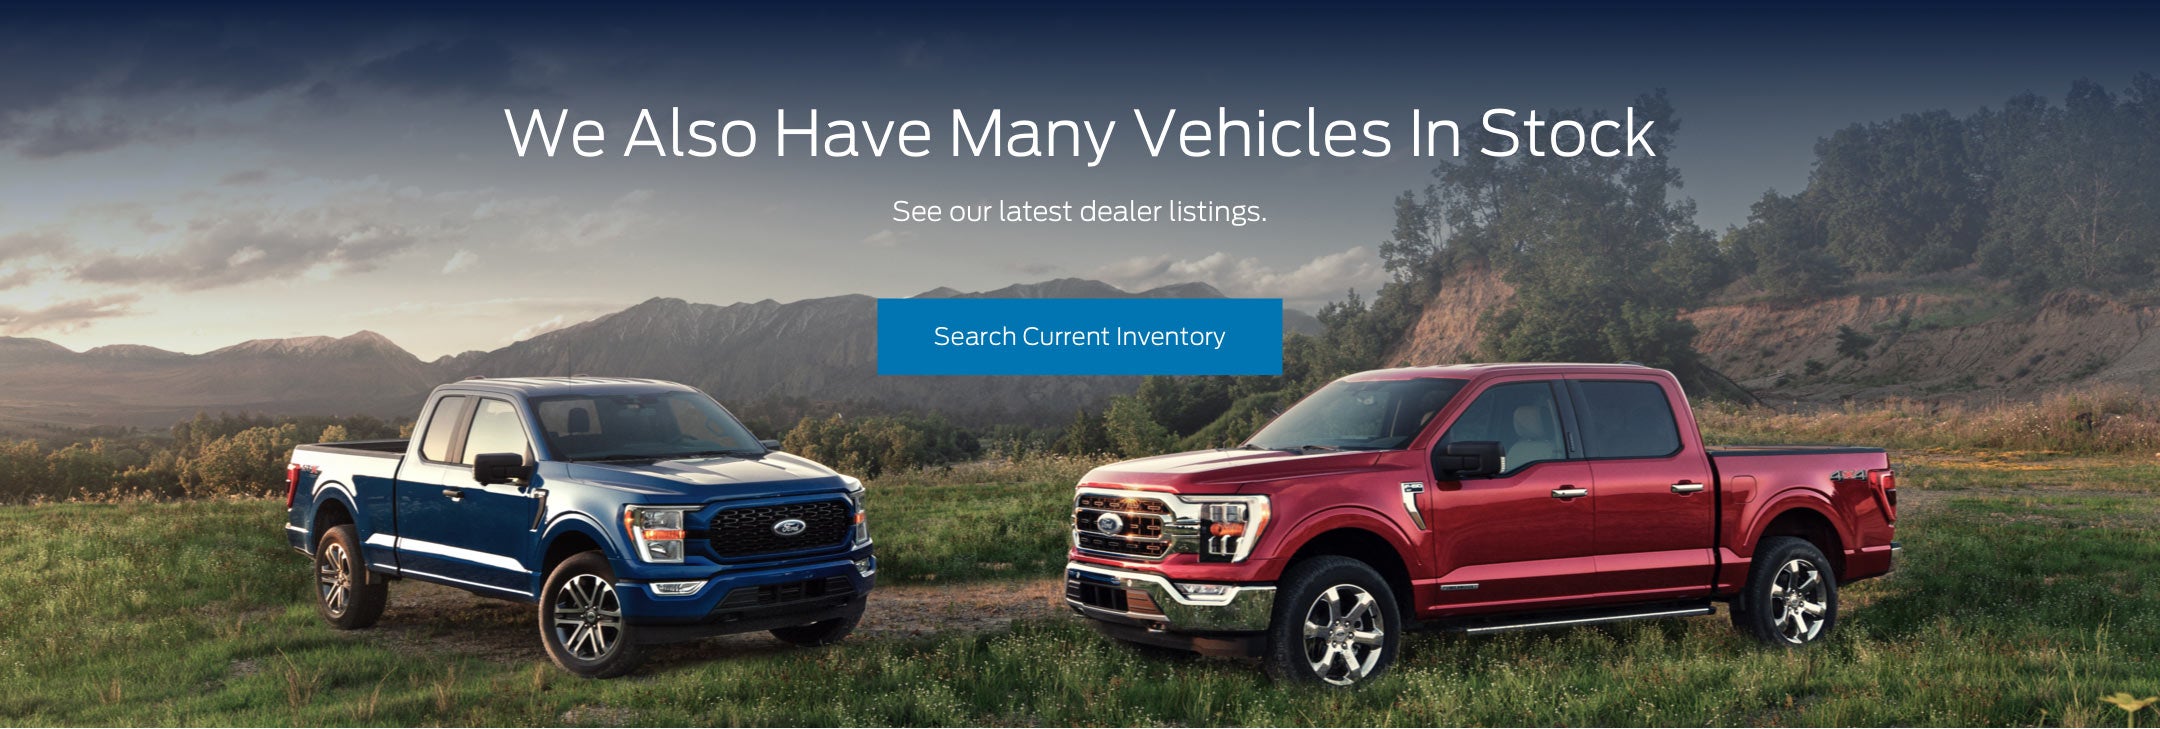 Ford vehicles in stock | Sentry Ford in Medford MA